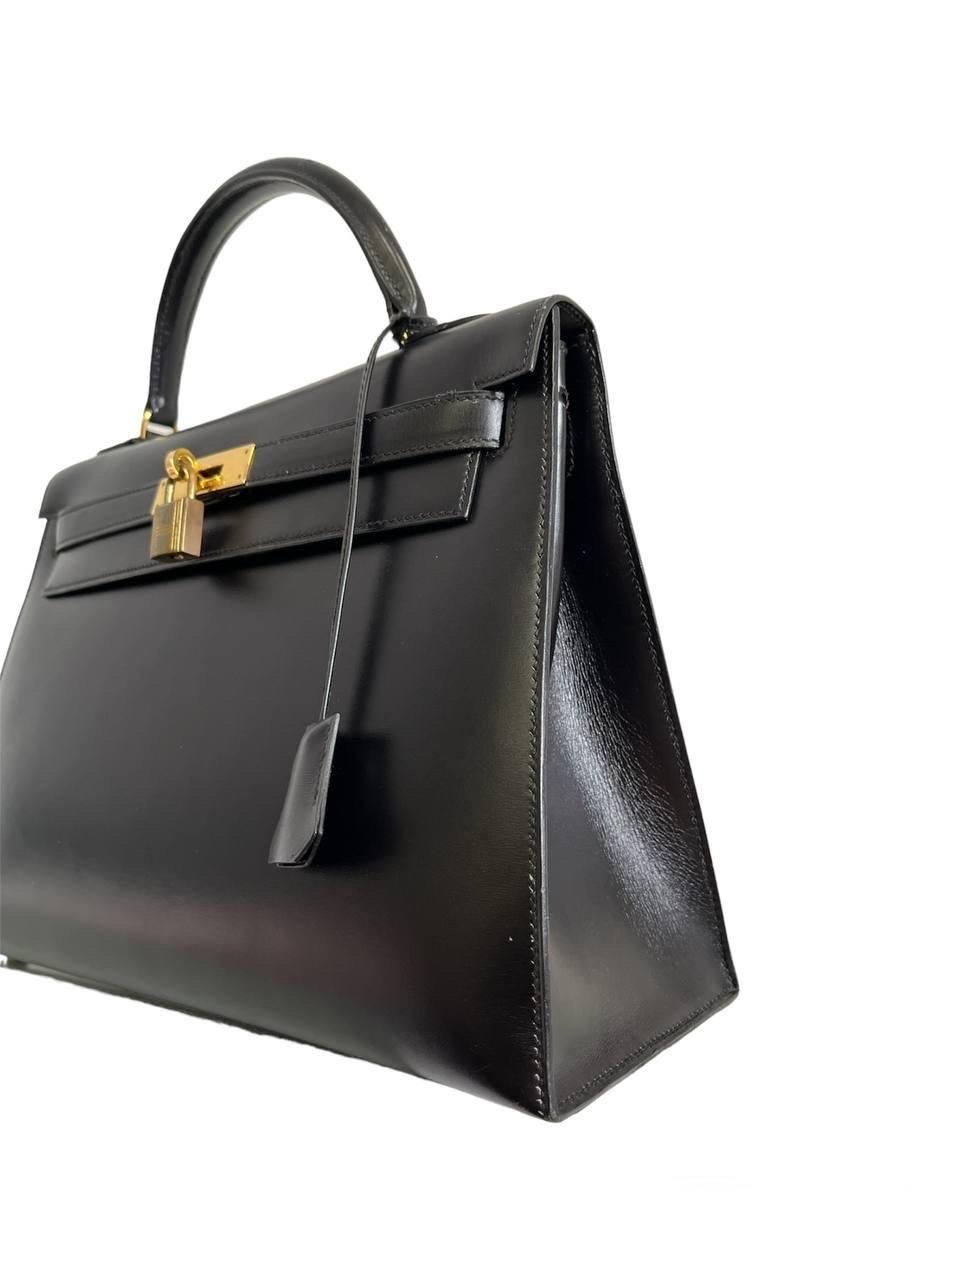 Bag by Hermès, Kelly model, size 32, made of Box Calf leather, rigid, smooth and shiny, in the Noir color, with gold-tone hardware. Equipped with a flap with interlocking closure with horizontal band, complete with padlock, clochette and keys.